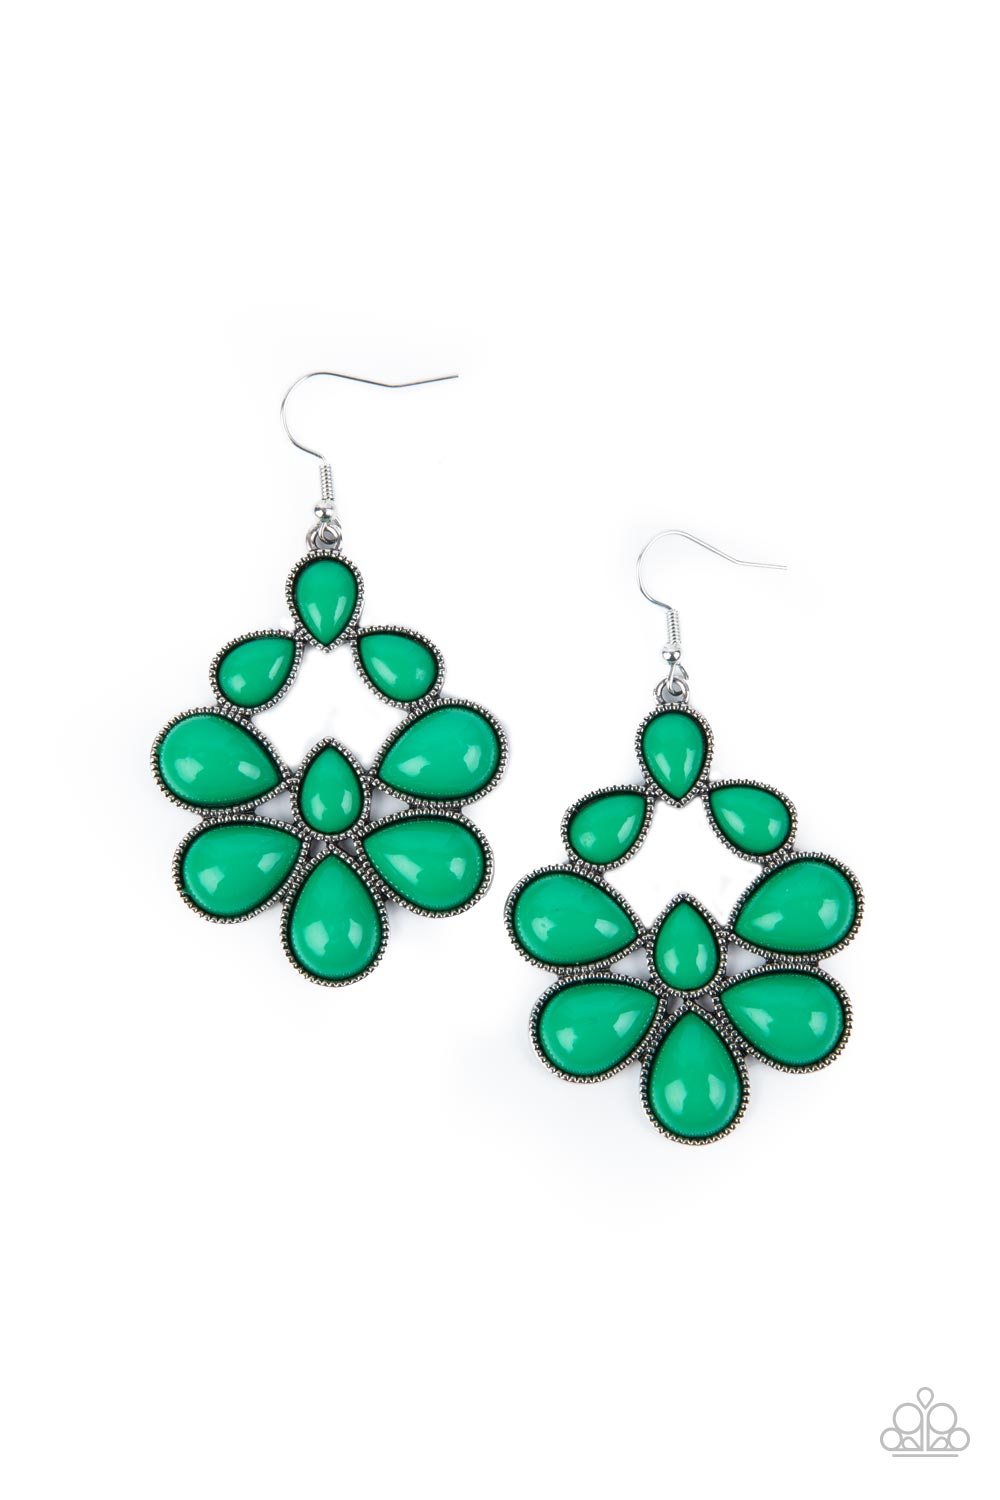 In Crowd Couture Green Earrings - Paparazzi Accessories- lightbox - CarasShop.com - $5 Jewelry by Cara Jewels